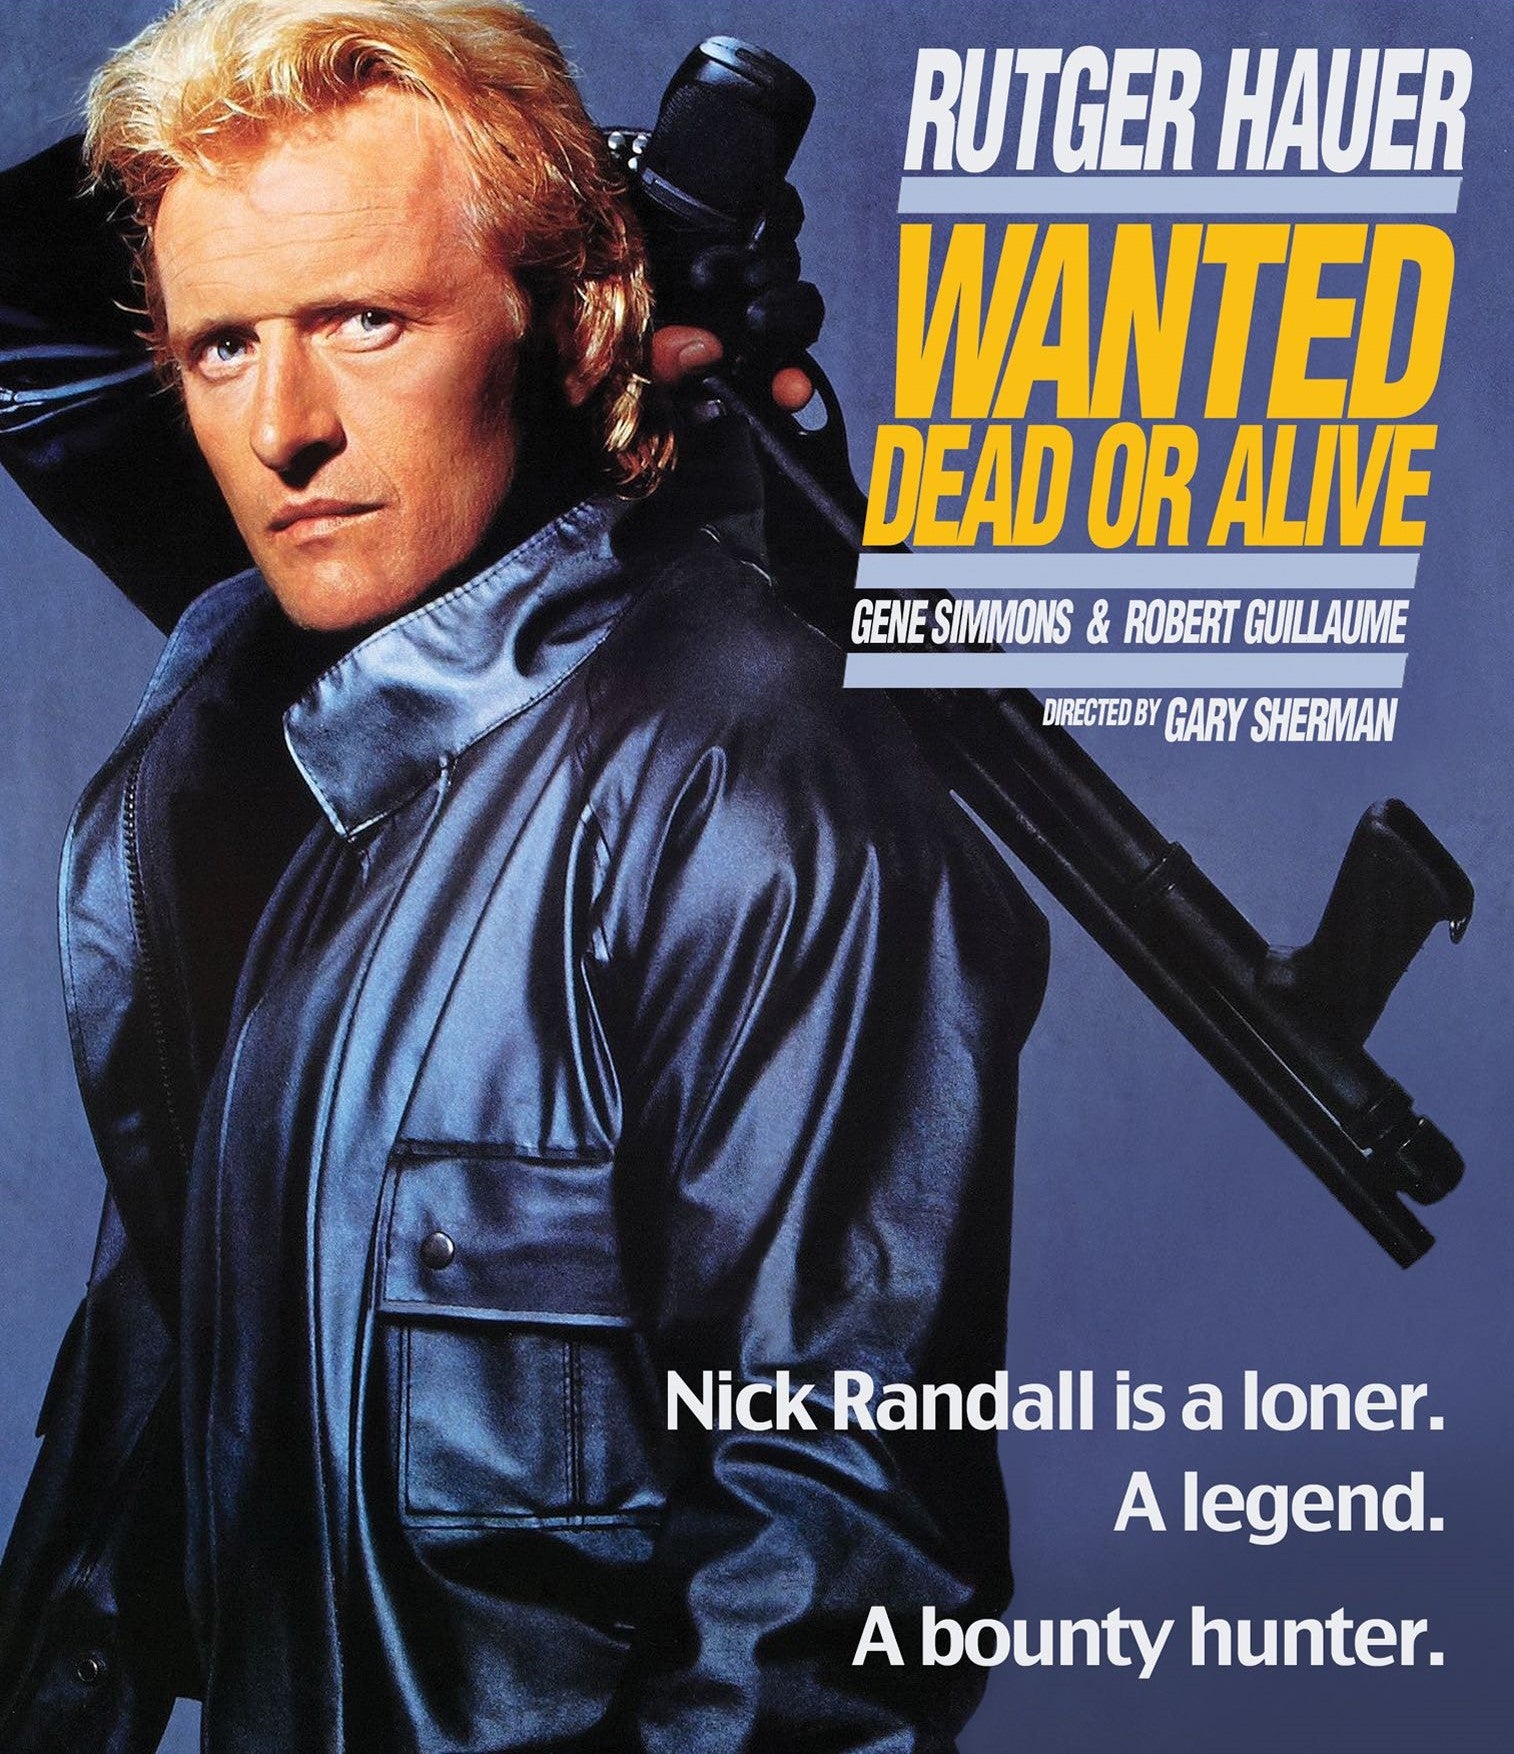 WANTED: DEAD OR ALIVE BLU-RAY